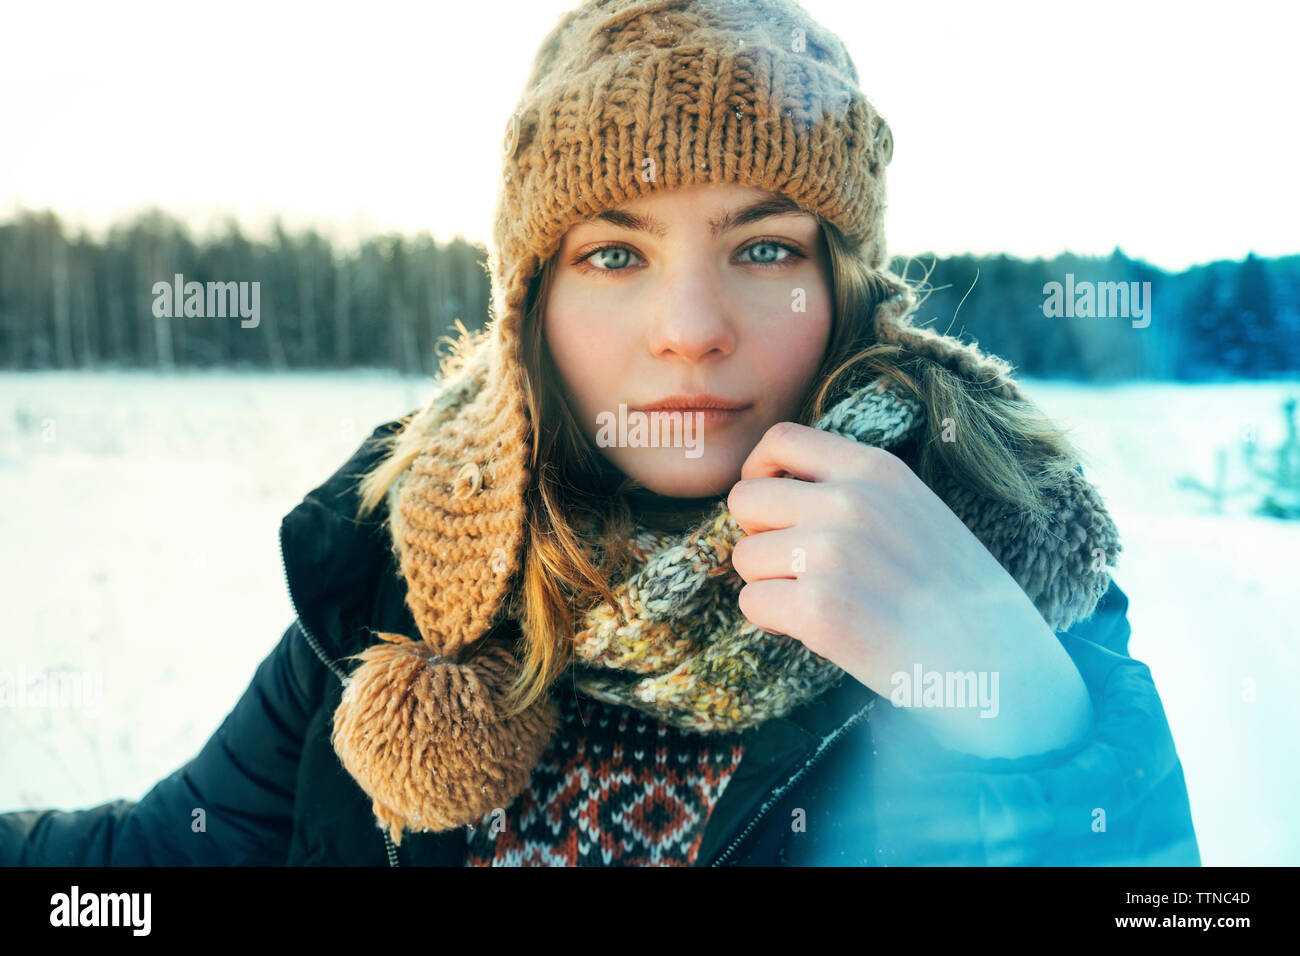 Portrait of a beautiful woman on a winter day Stock Photo